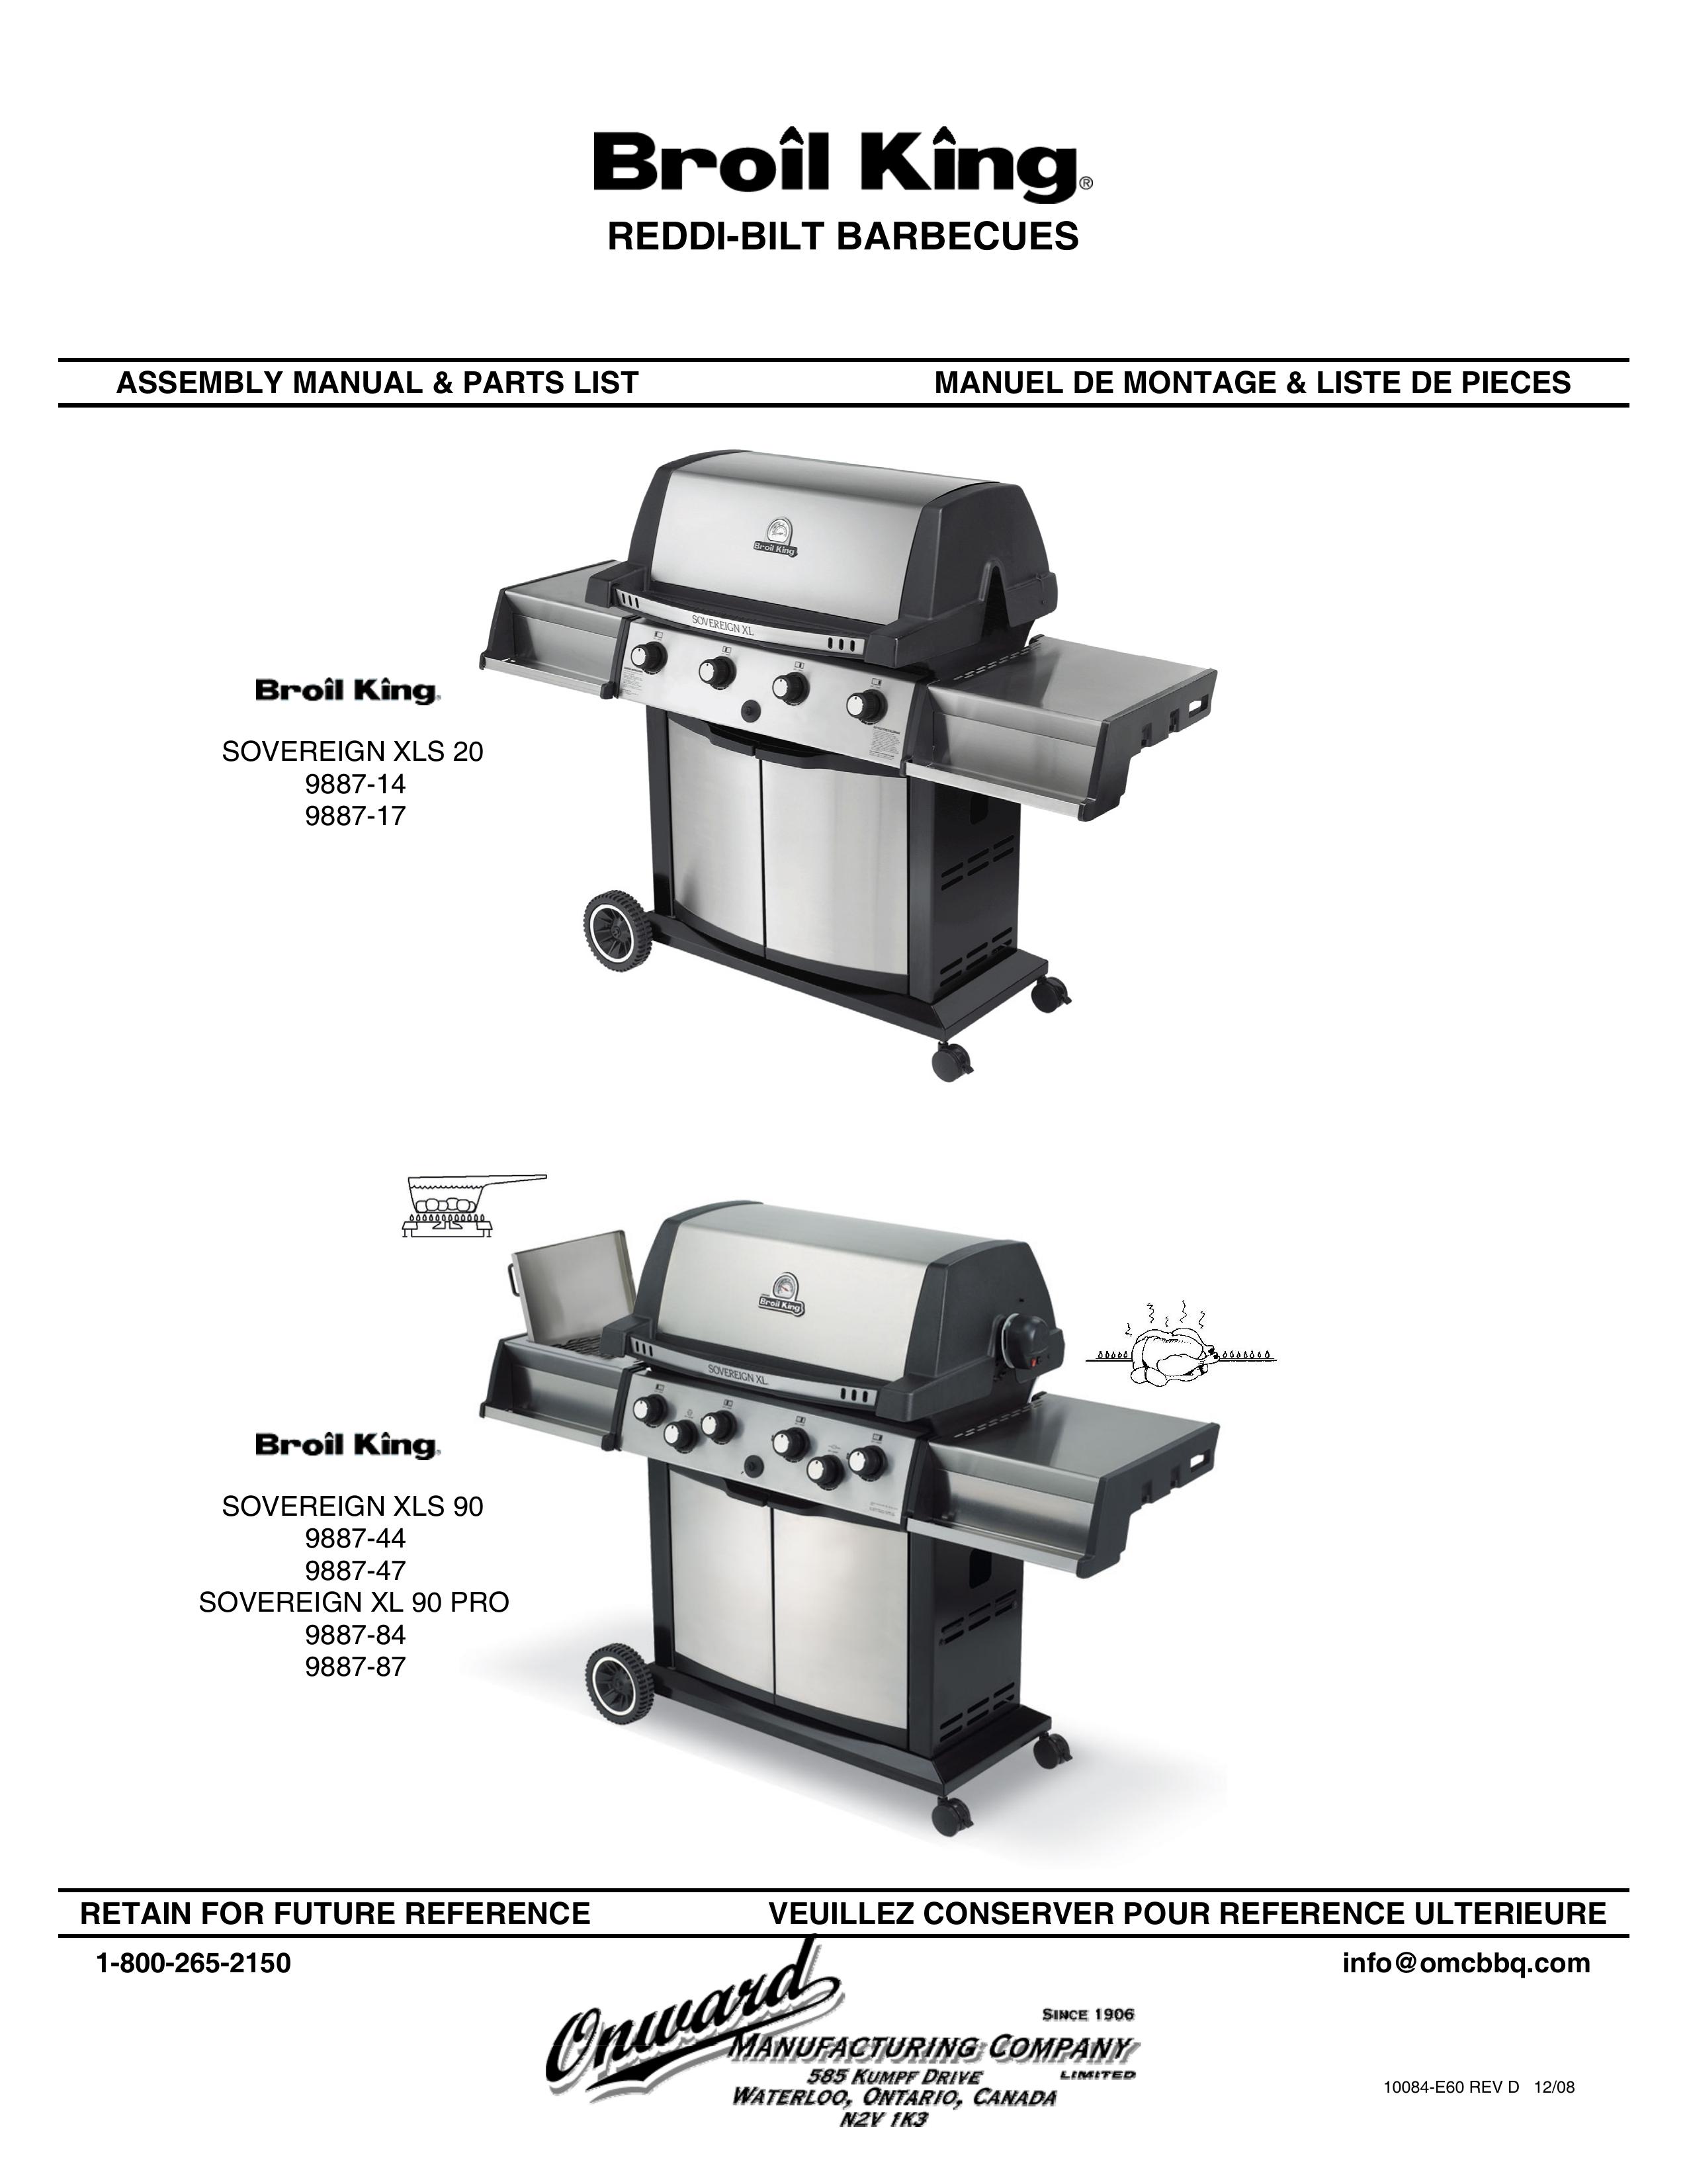 Broil King 9887-44 Electric Grill User Manual (Page 1)